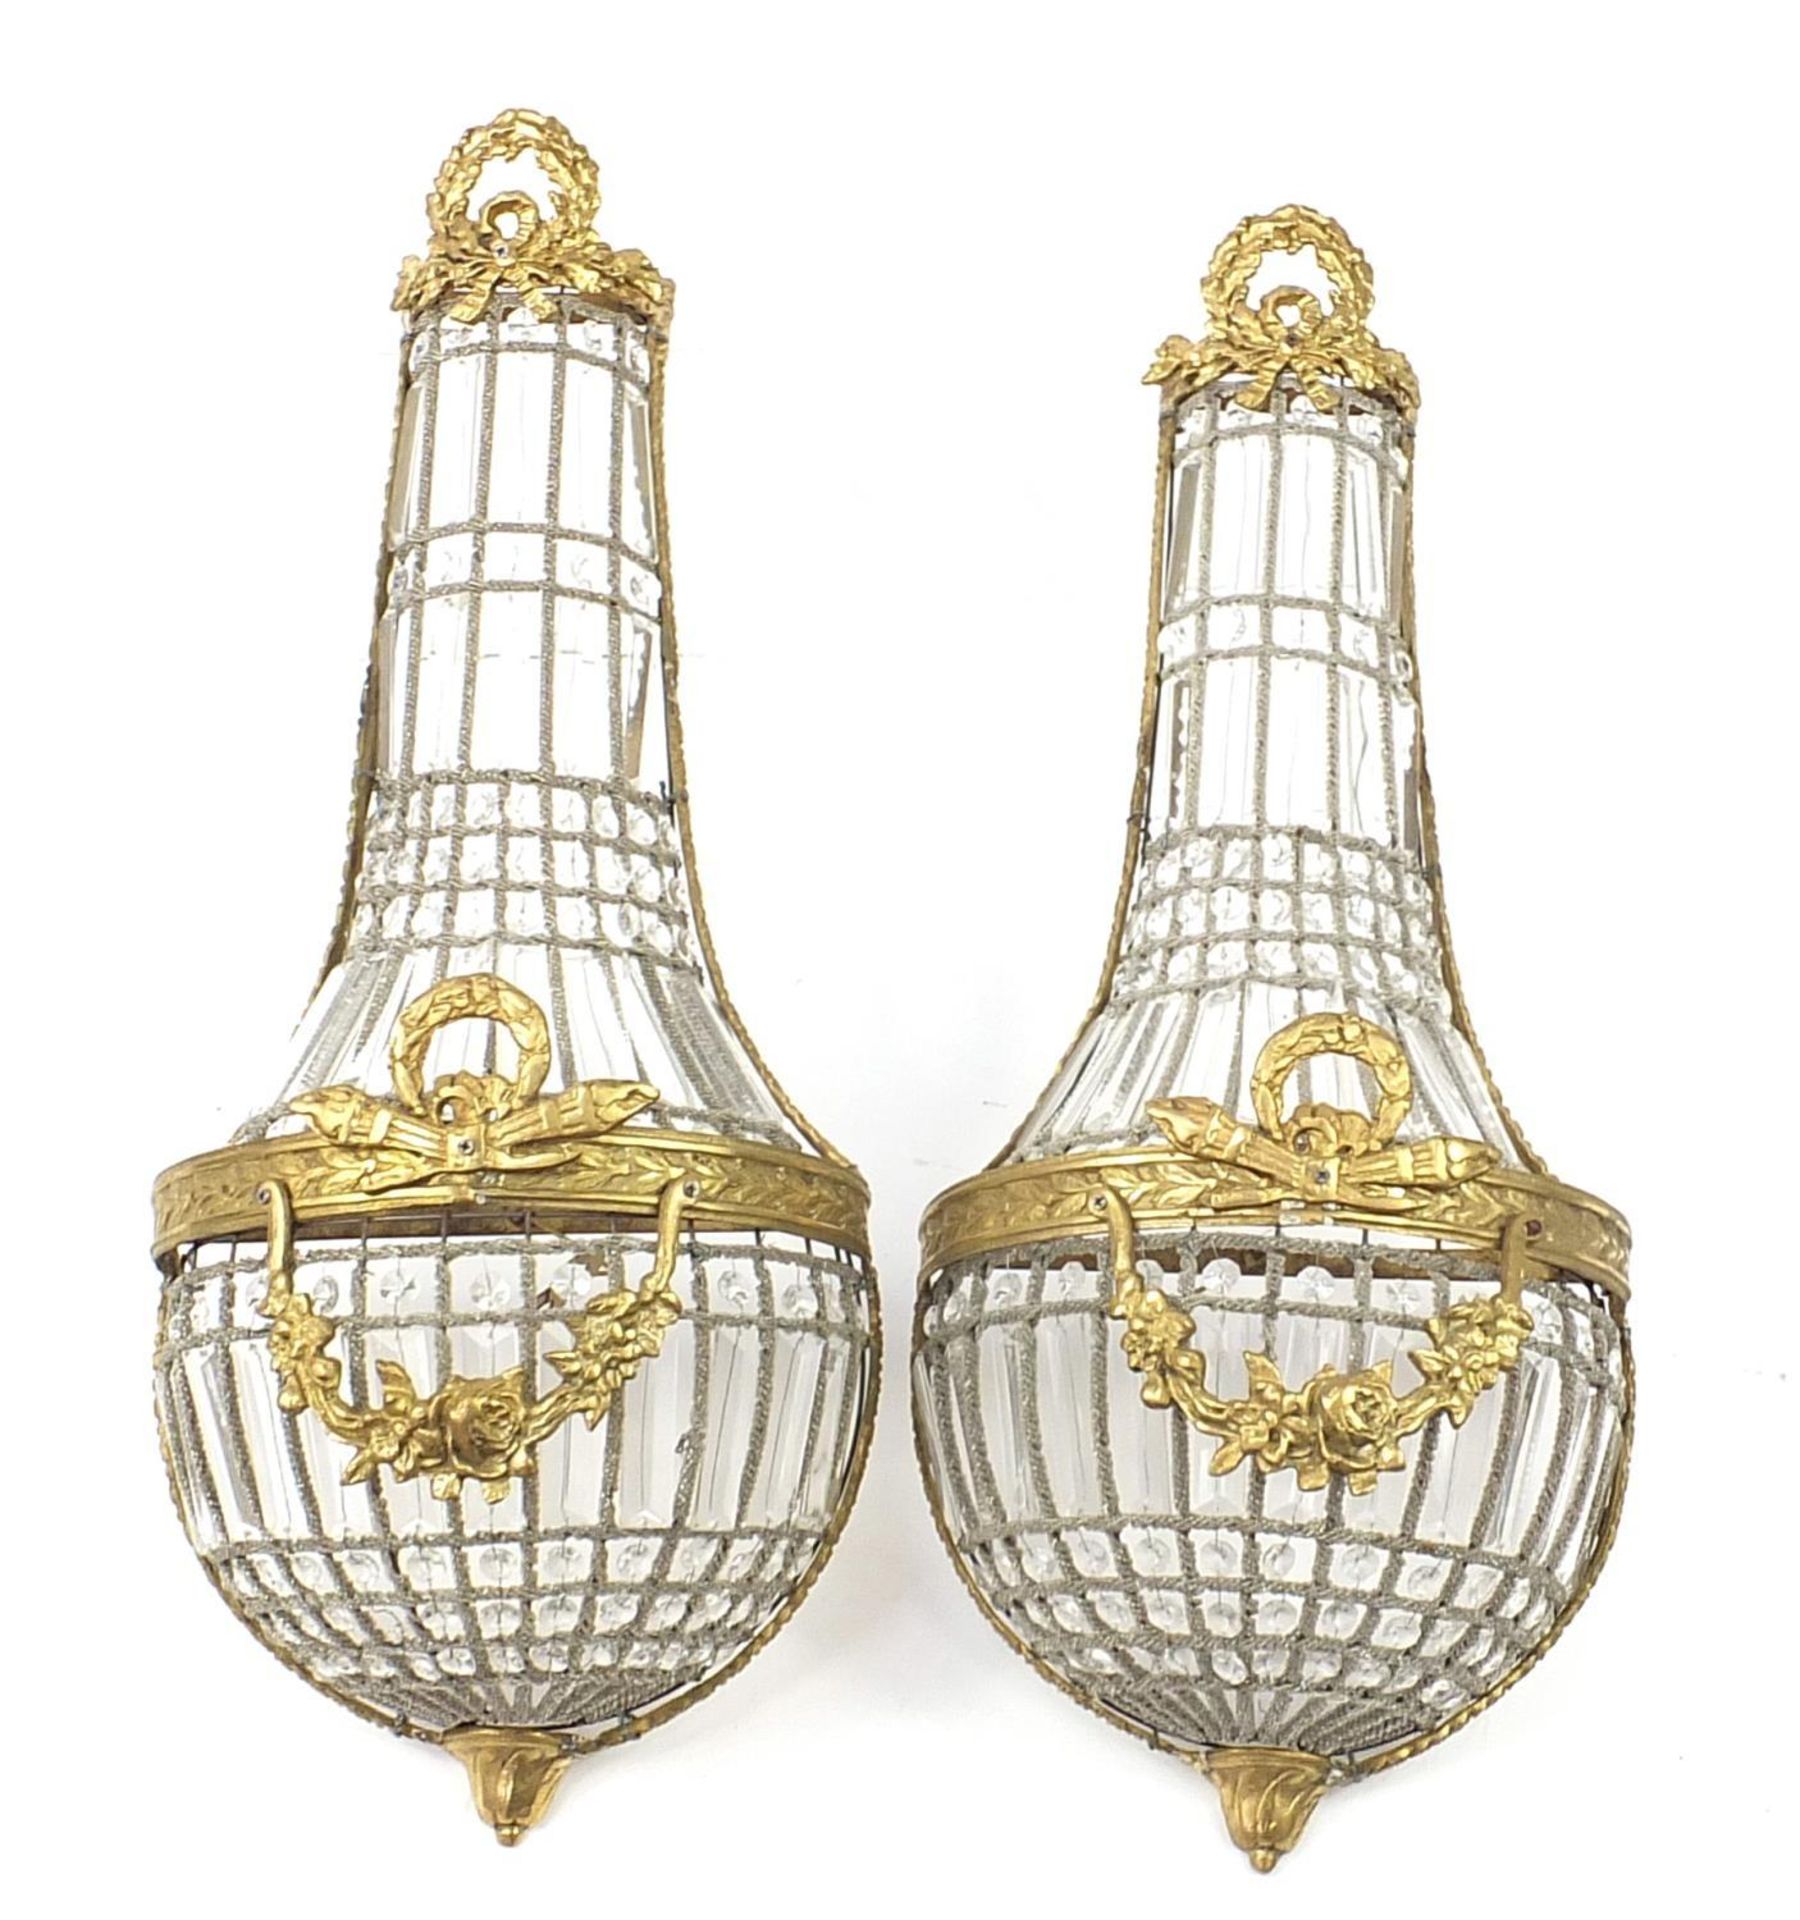 Pair of ornate gilt metal chandelier design wall sconces with bow design, each 71cm high :